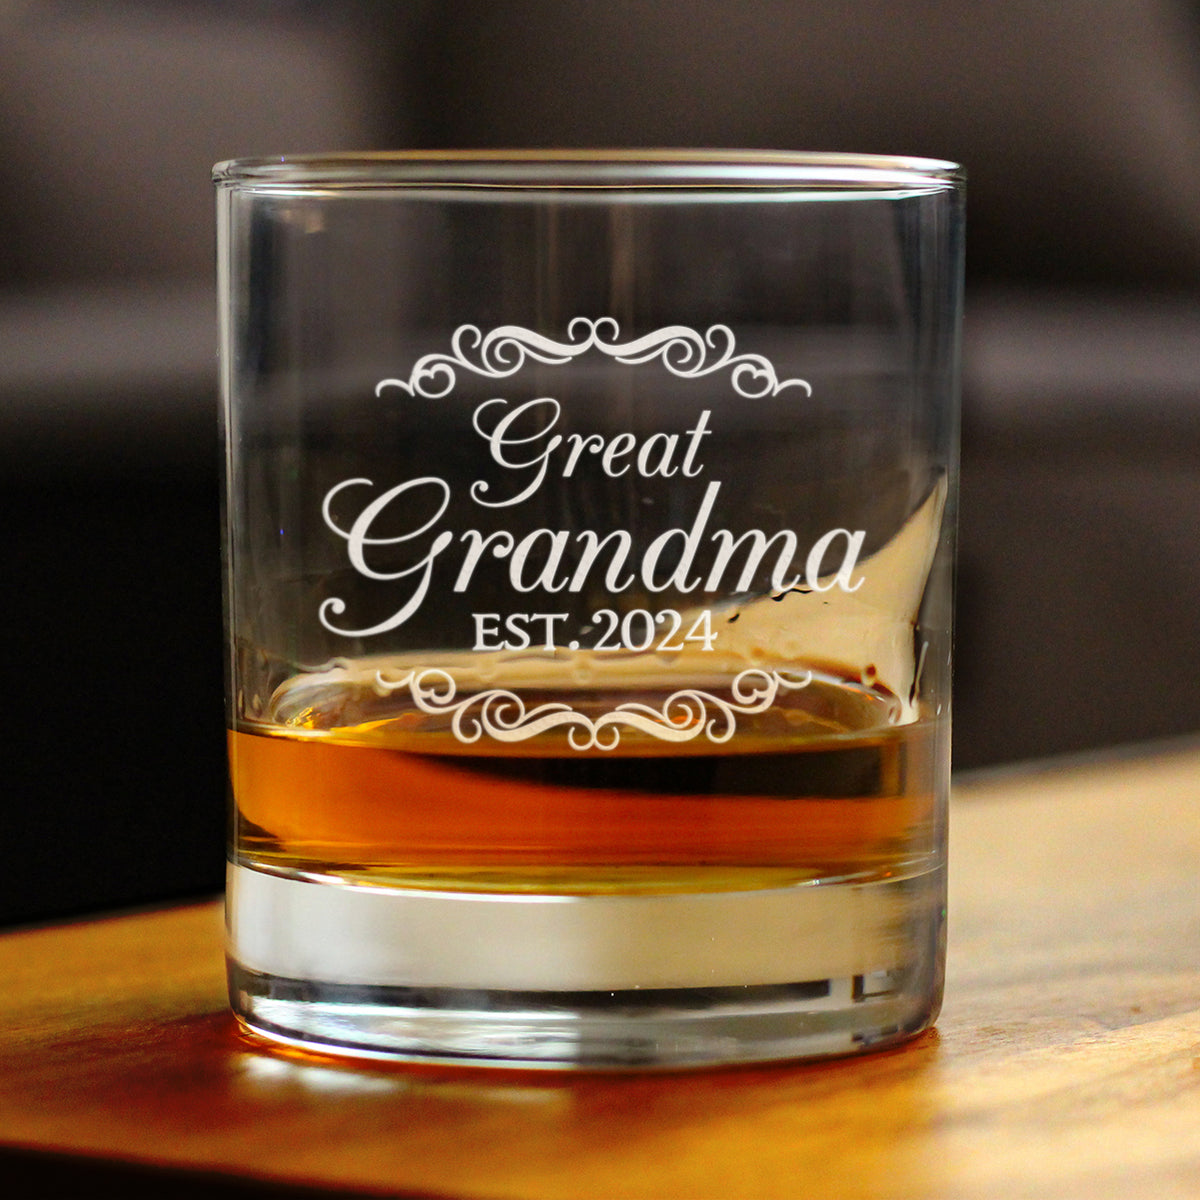 Great Grandma Est 2024 - New Great Grandmother Whiskey Rocks Glass Gift for First Time Great Grandparents - Decorative 10.25 Oz Glasses